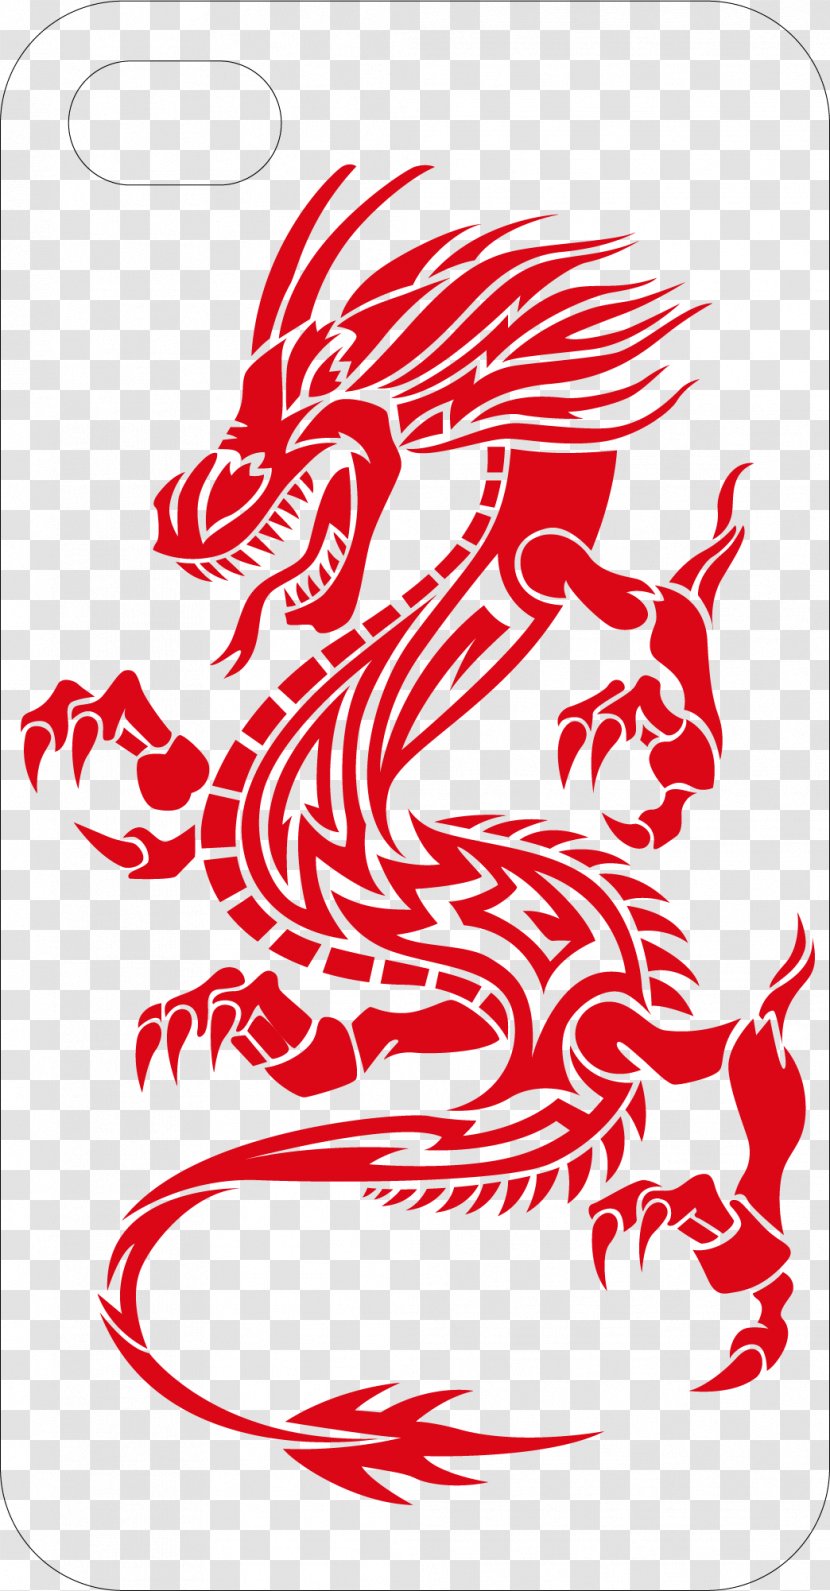 Tattoo Dragon Tribe Illustration - Point - Long Beautiful Mobile Phone Shell Transparent PNG